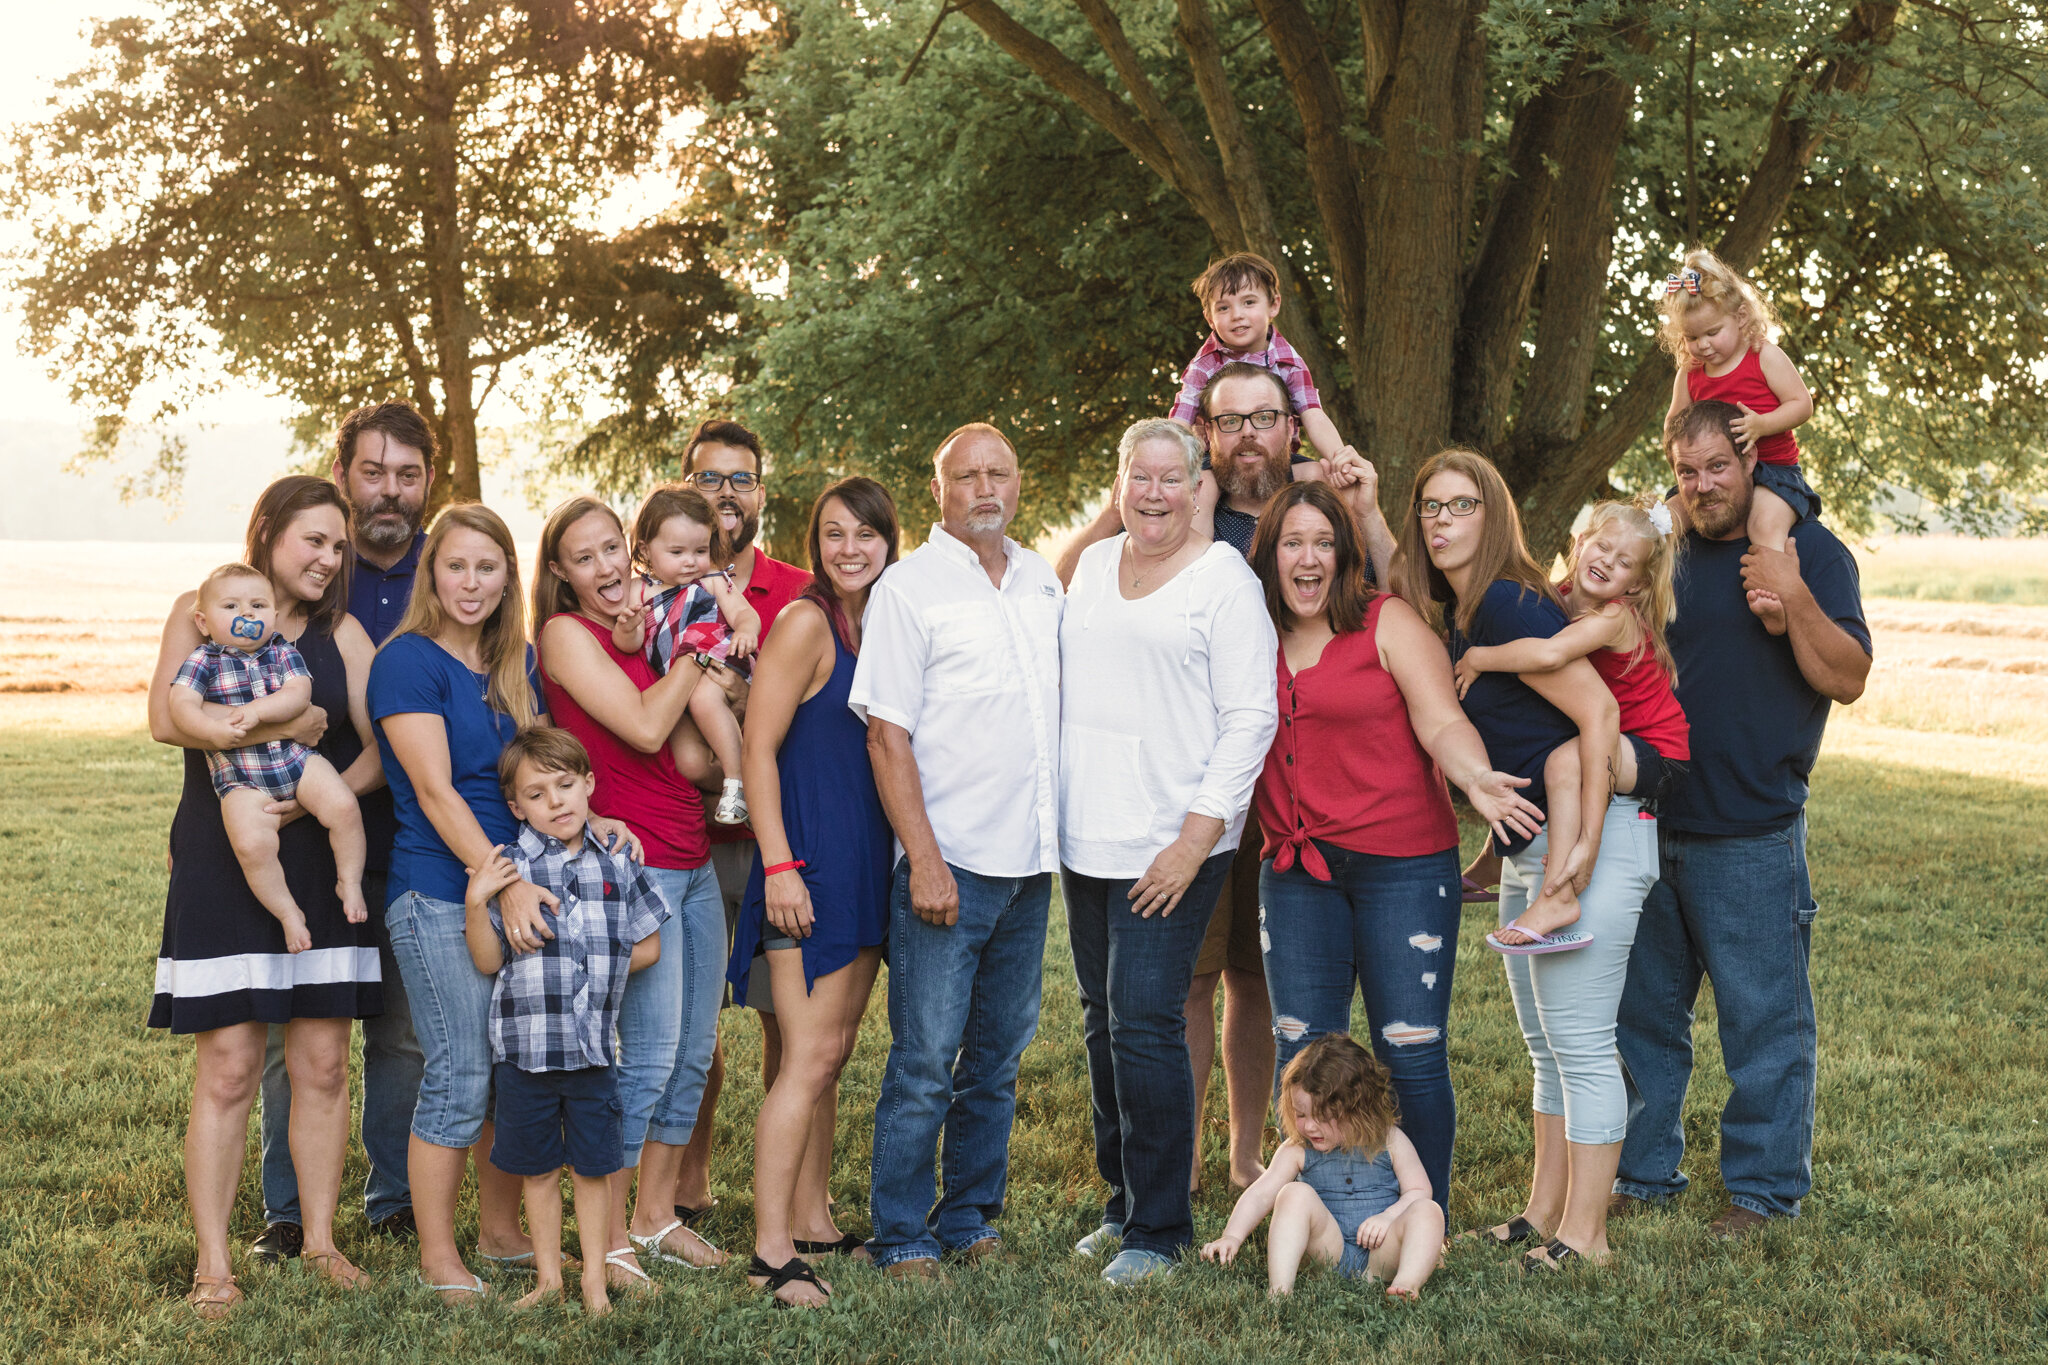 Extended_Family_Session_with_Grandparents_Senior_Marriage_Retired_One_Year_Anniversary_Fourth_of_July_Family_Pictures_Red_White_and_Blue_By_Family_Photographer_Christie_Leigh_Photo_in_Southington_Ohio-5.JPG